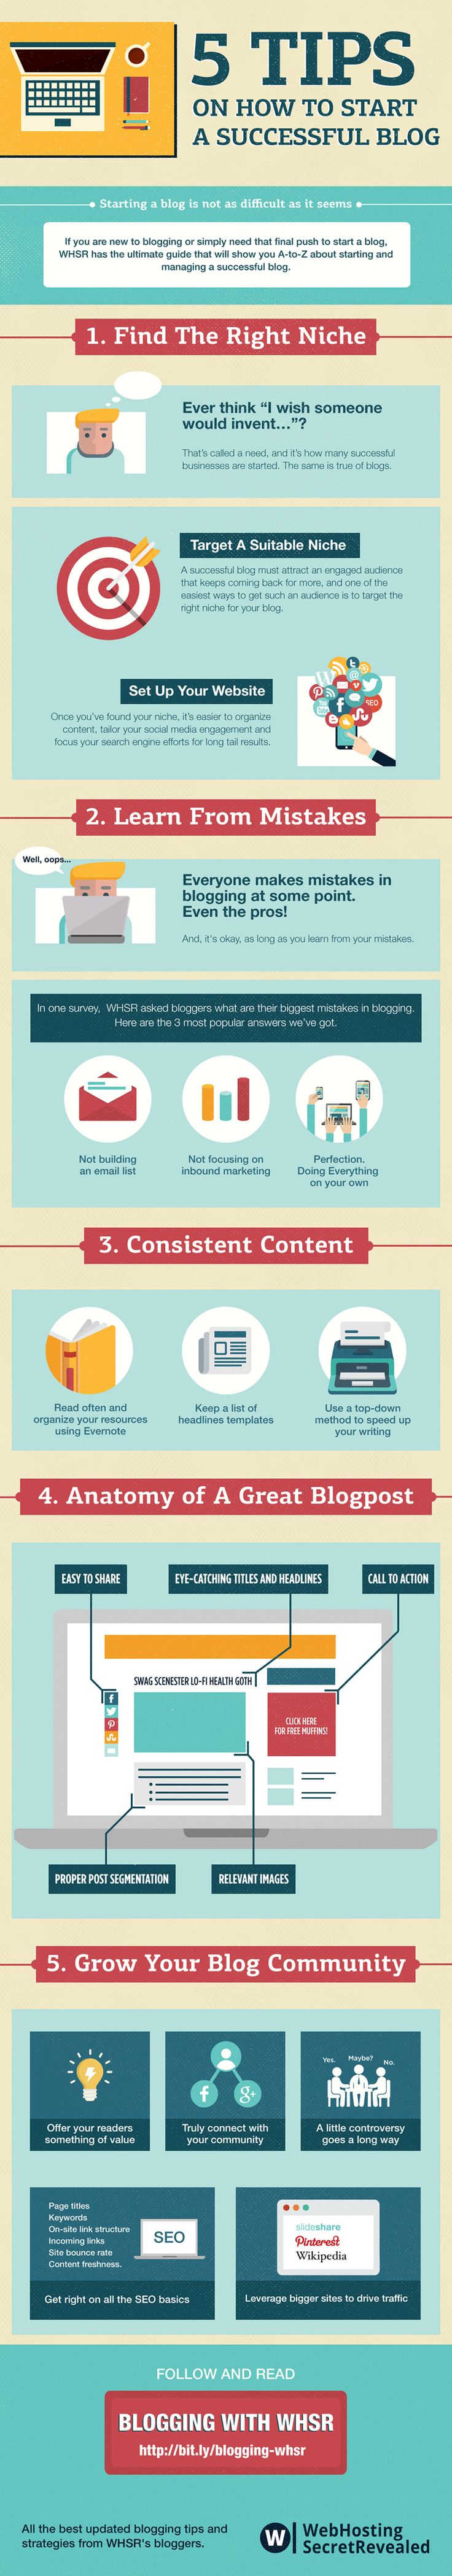 this infographic gives 5 tips you can use to start a successful blog